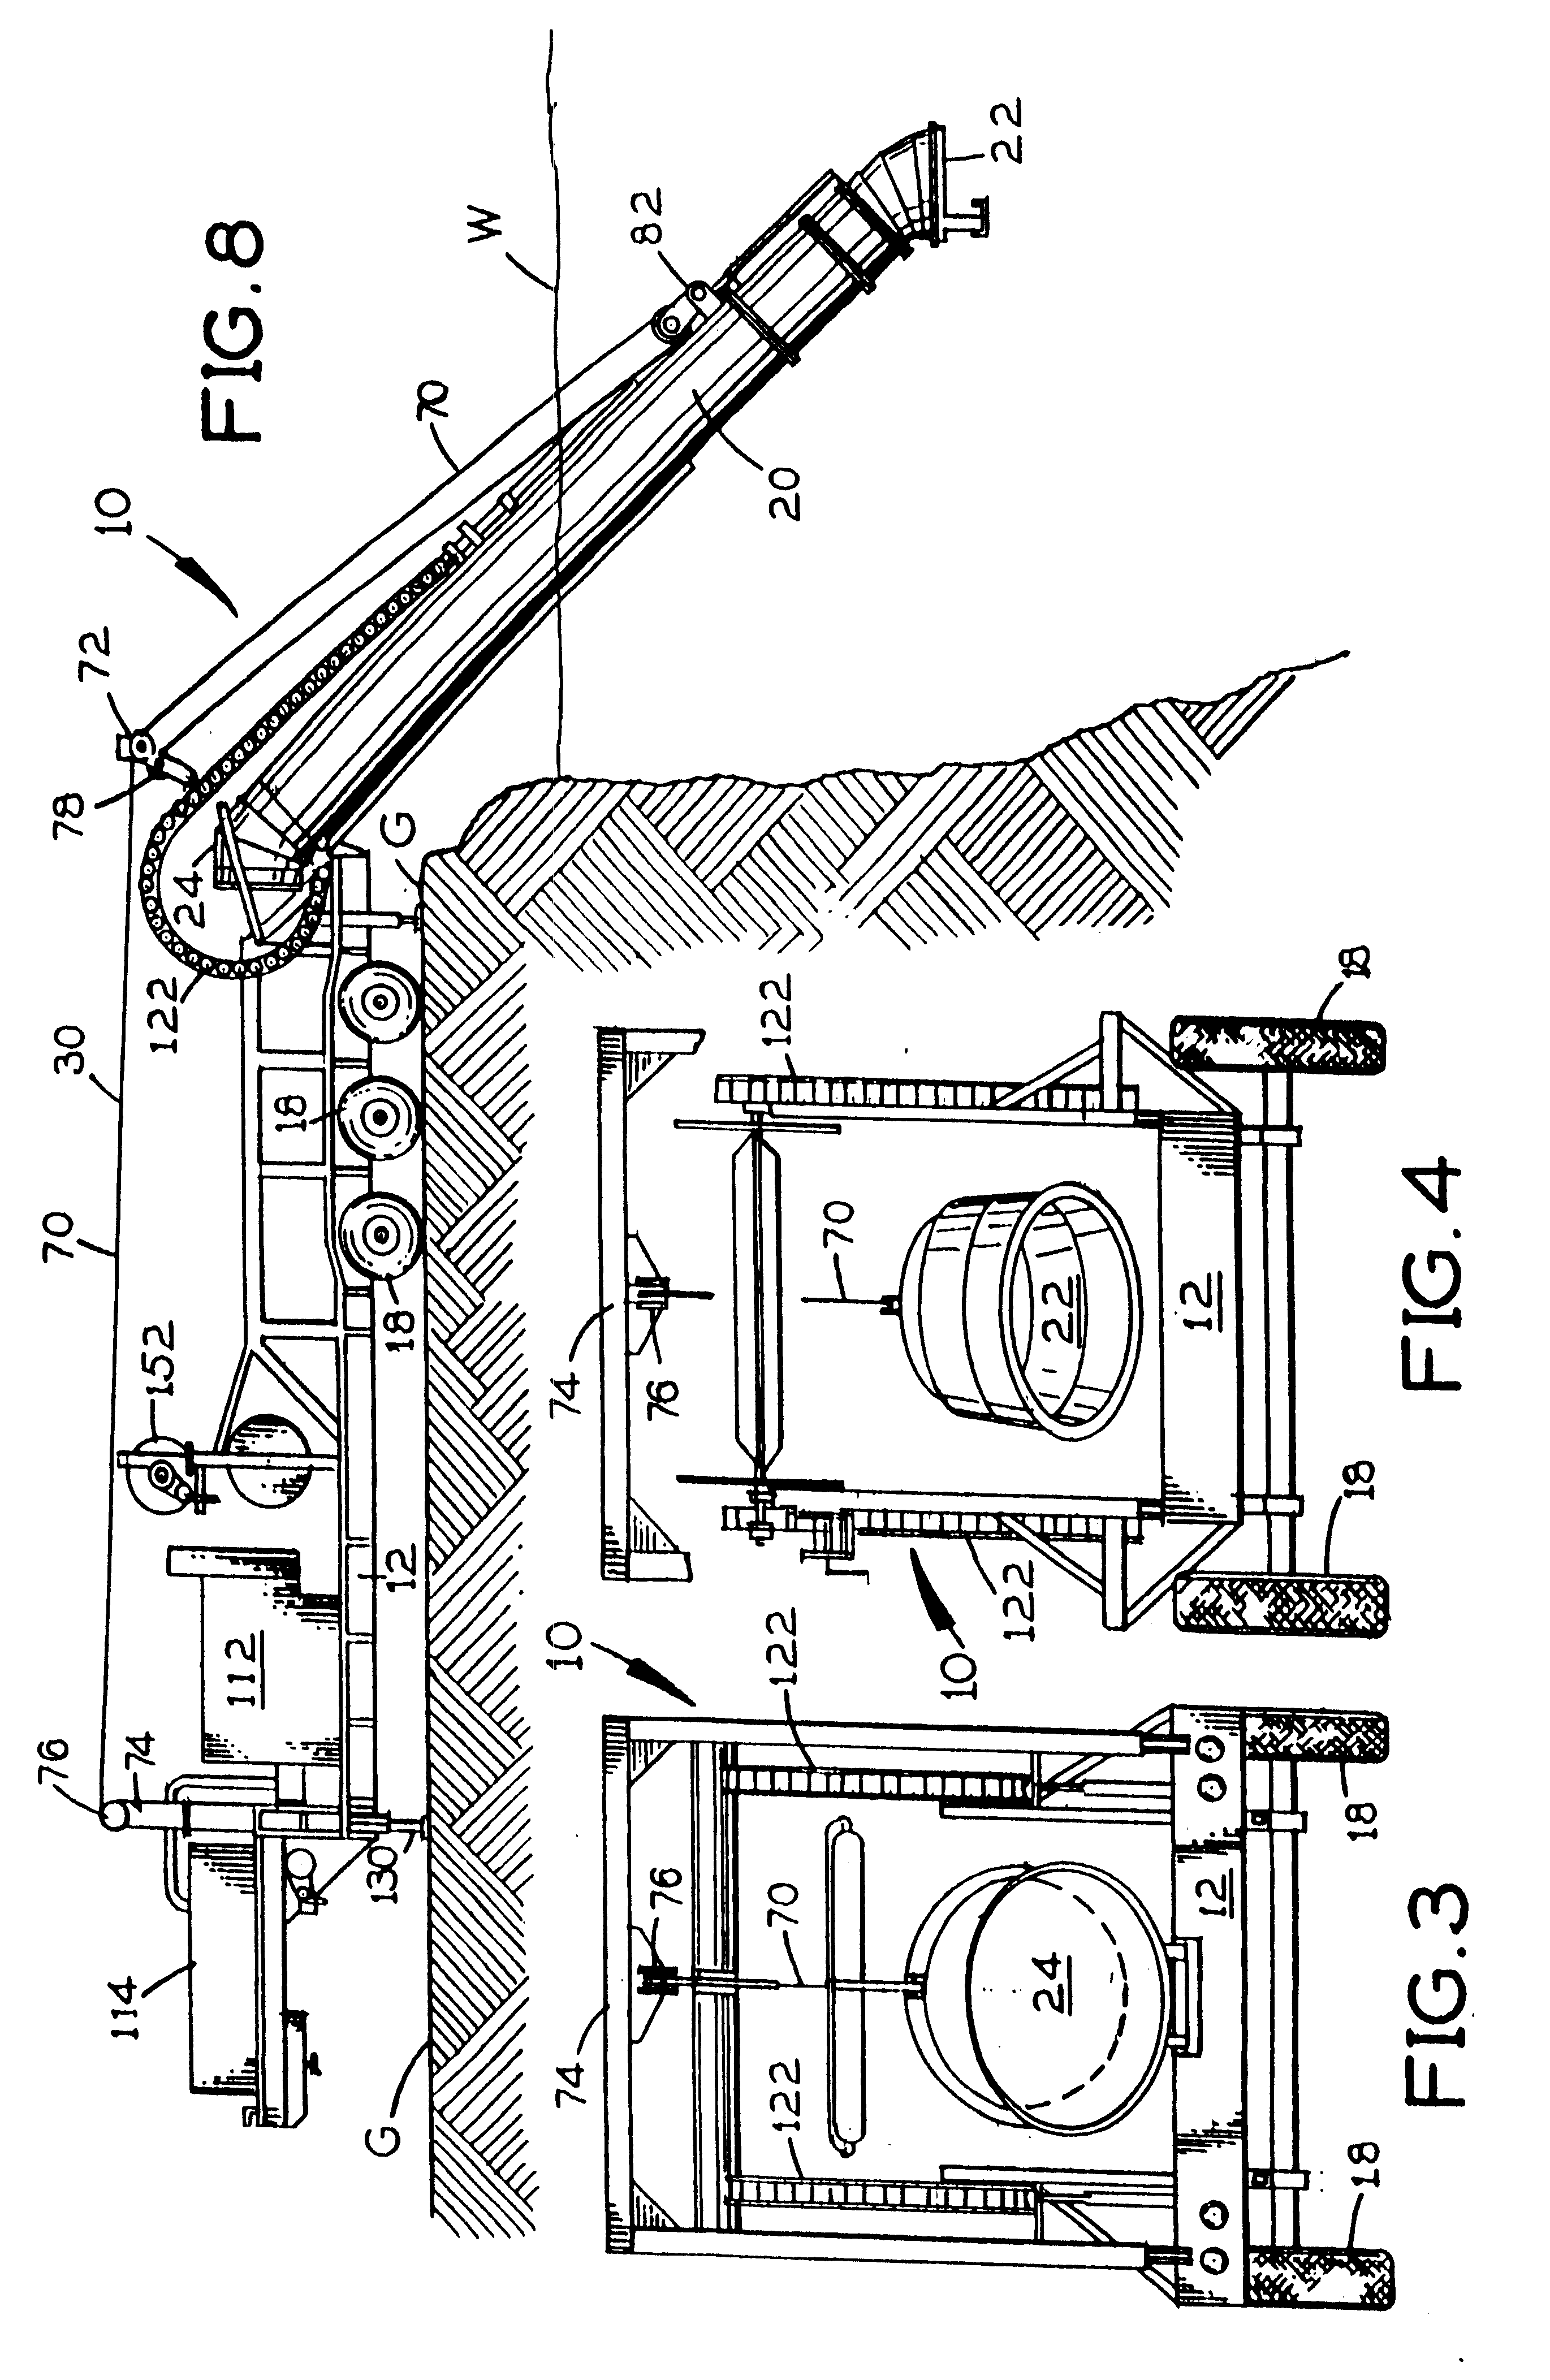 Pumping apparatus with extendable drawing pipe and impeller and impeller hydraulic drive means supplied by a hydraulic hose carried by a segmented hydraulic hose support